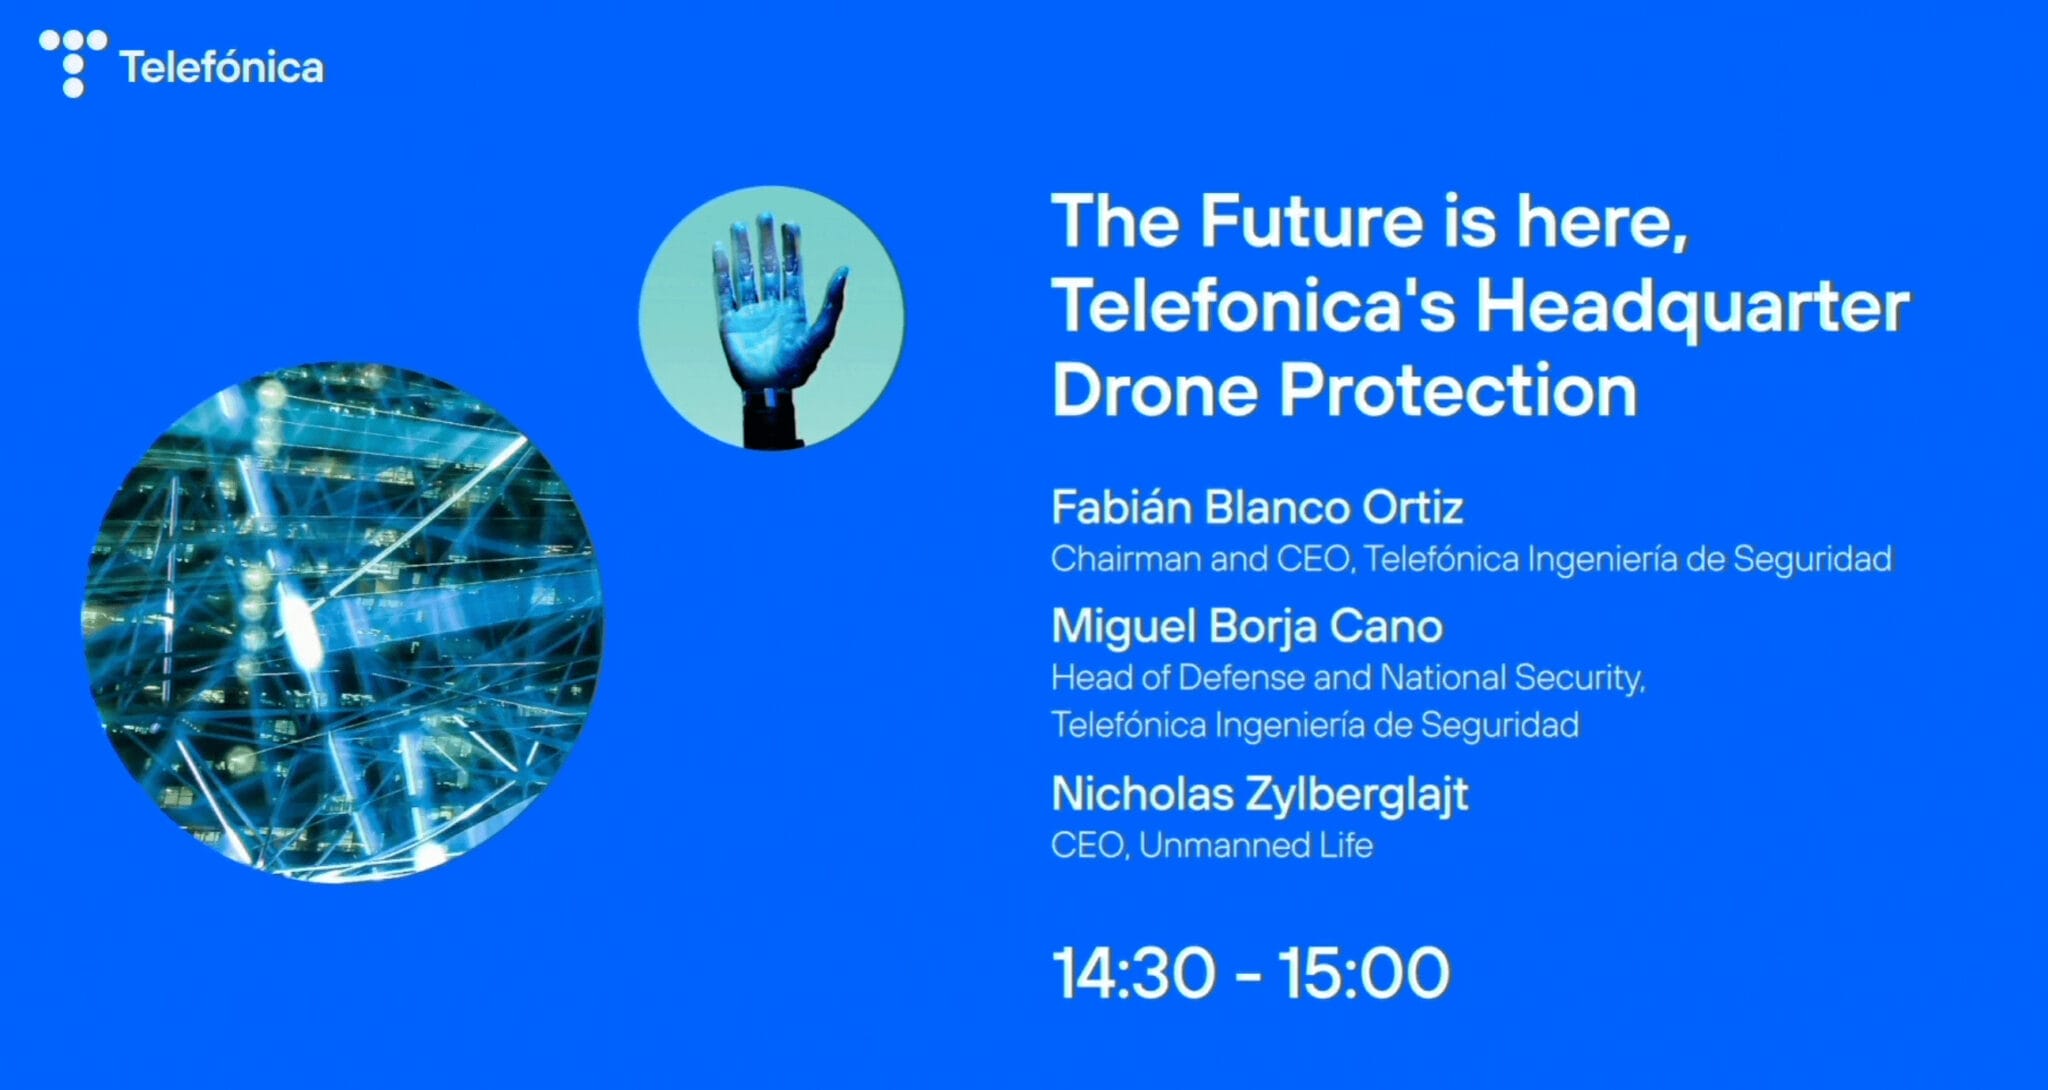 The Future is here, Telefonica’s Headquarter Drone Protection #MWC22